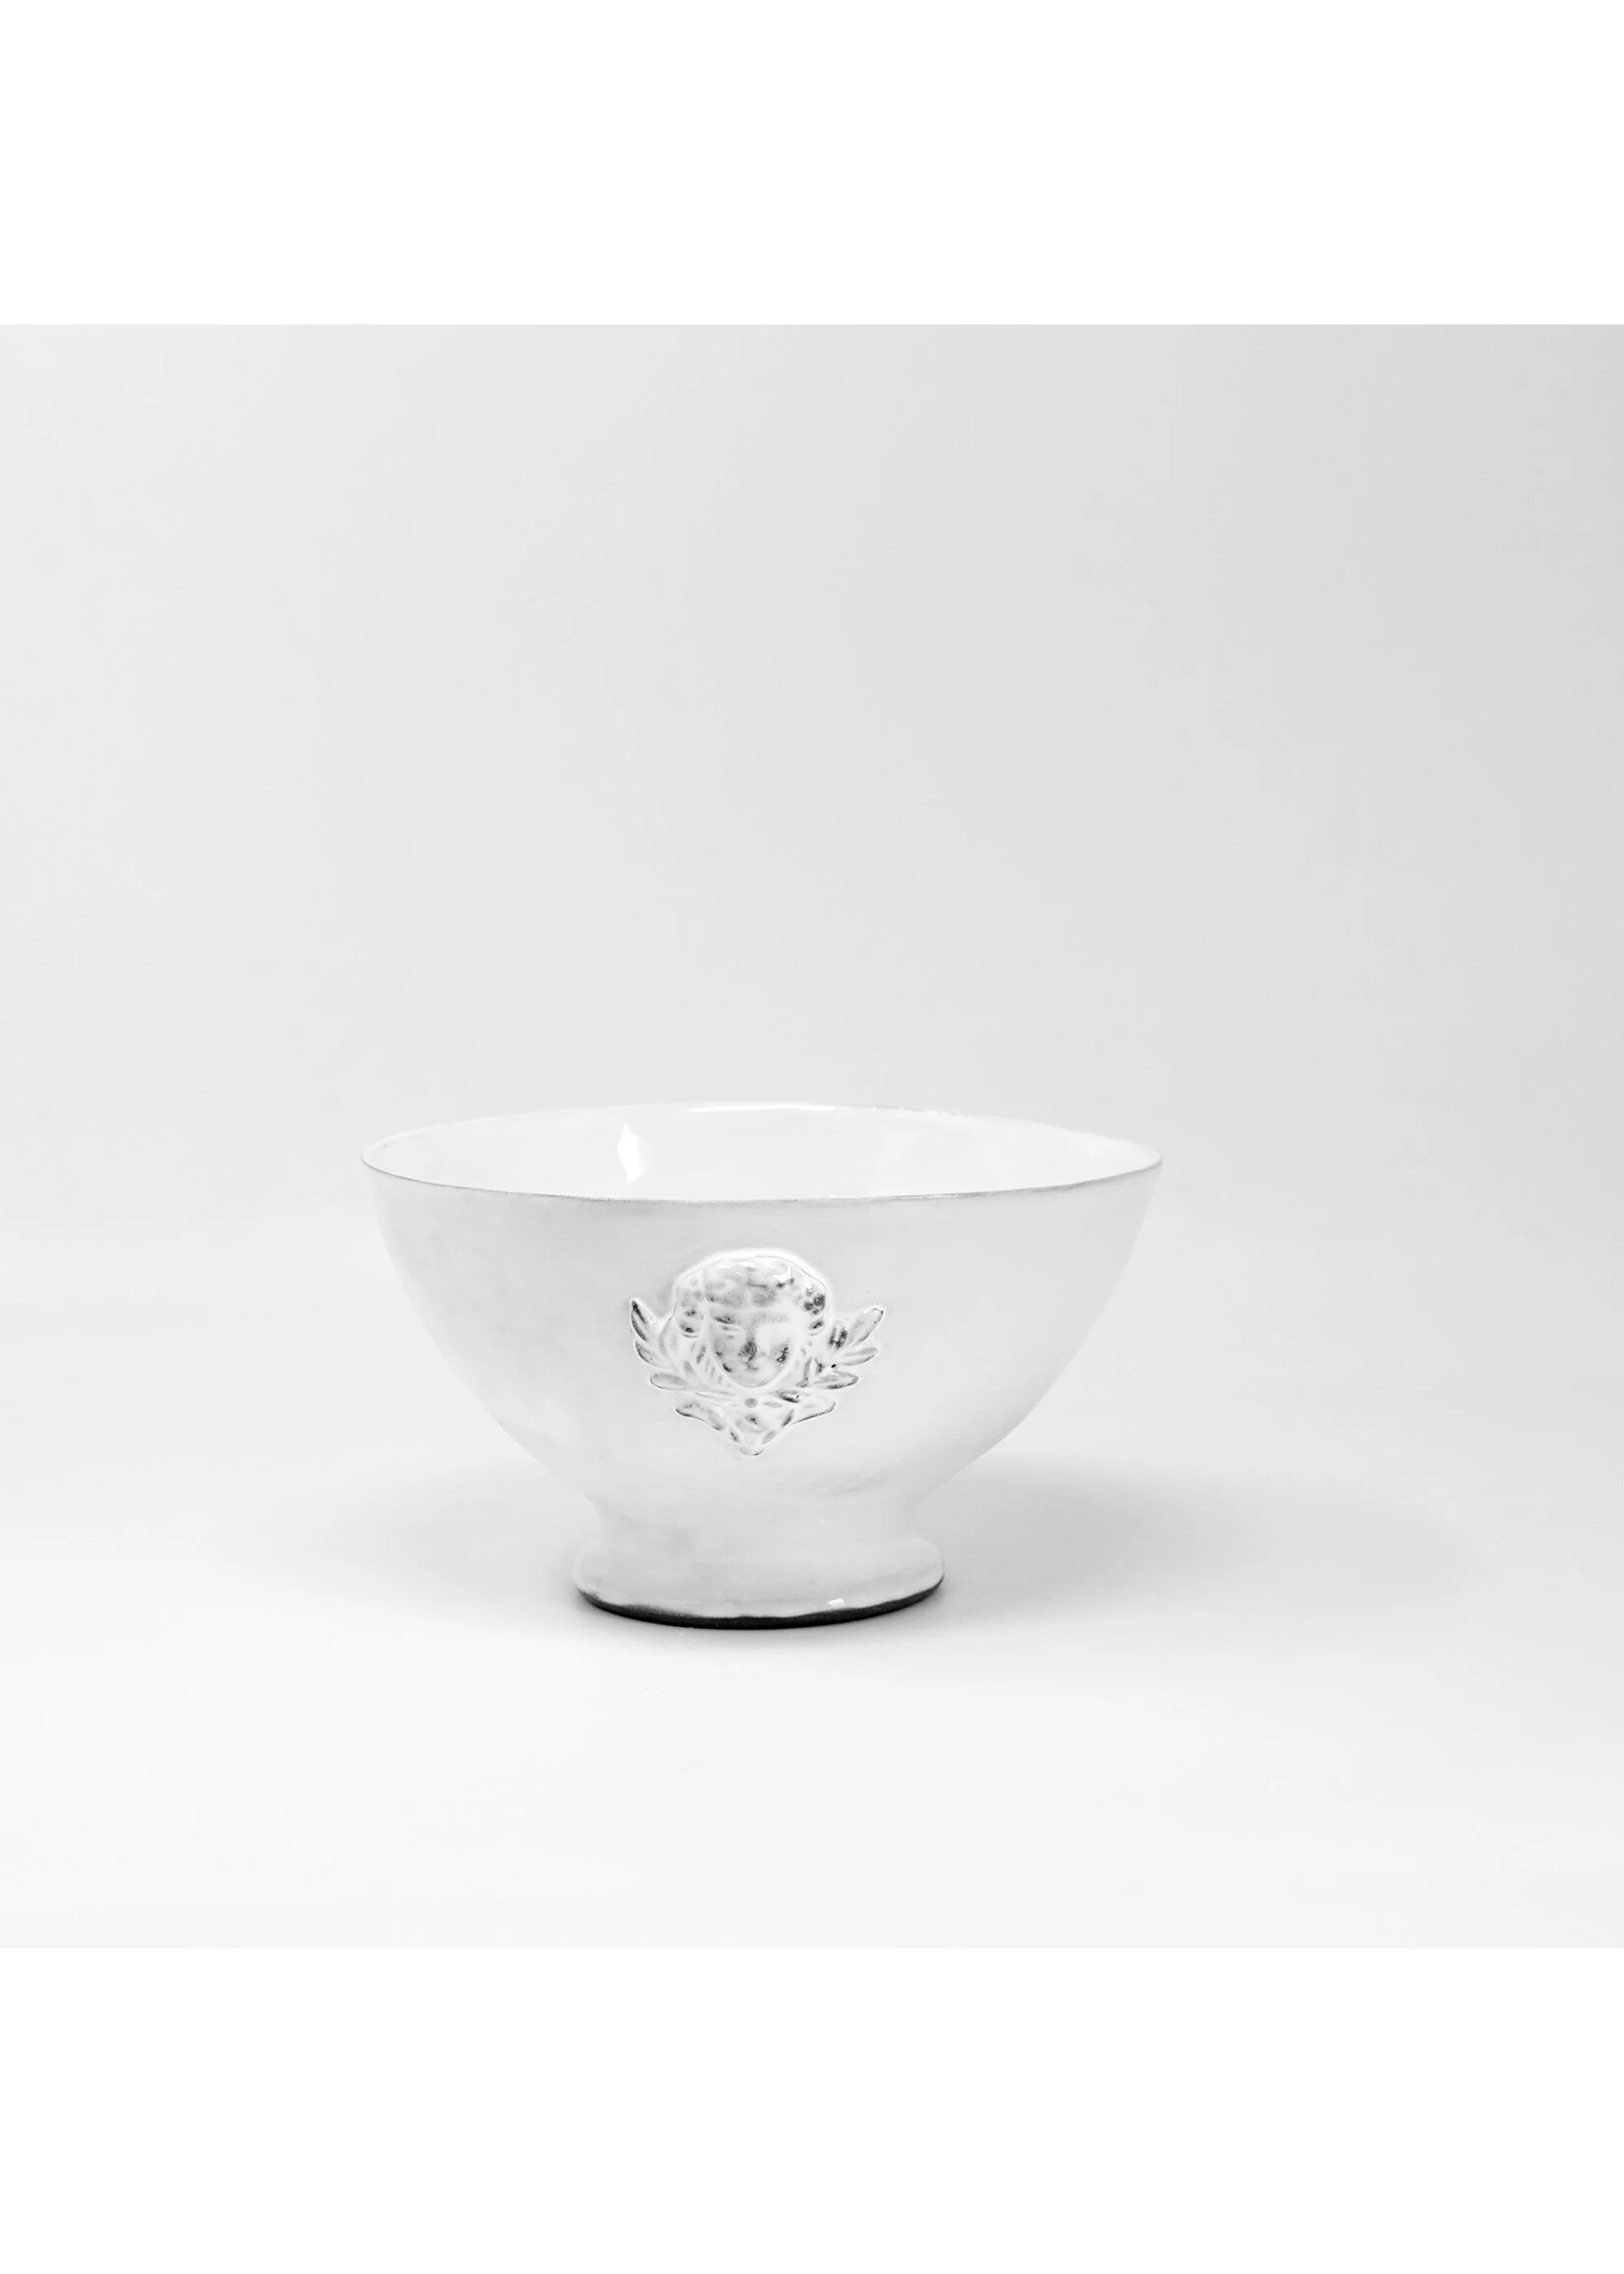 Carron Mon Jules Bowl on Foot - Large by Carron